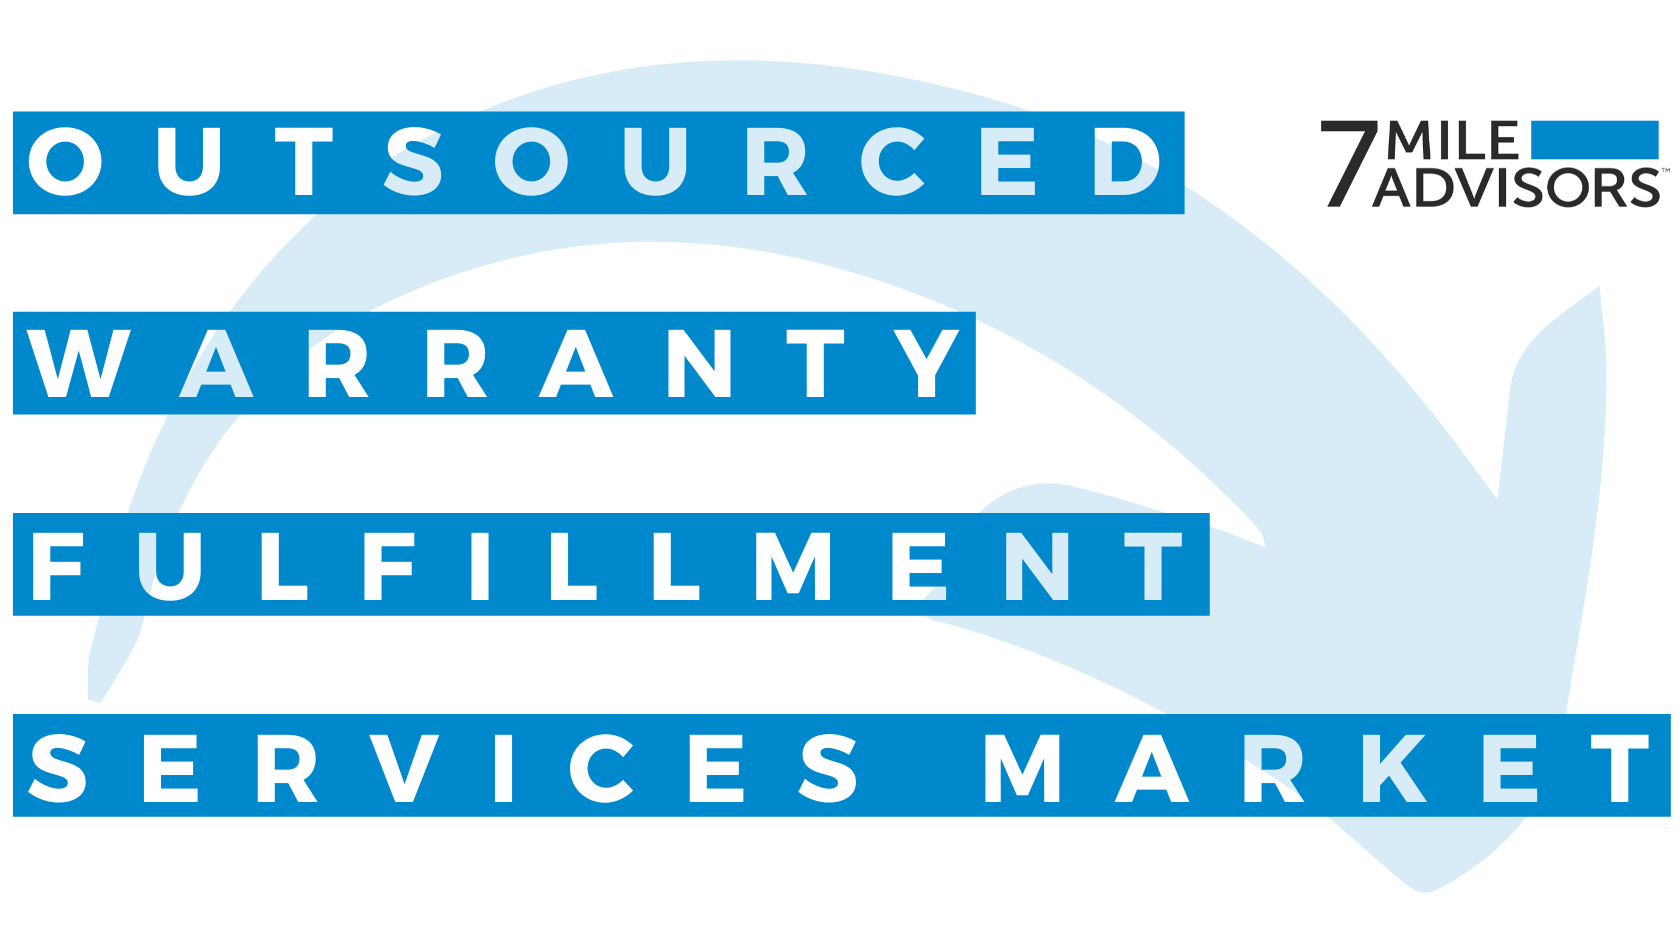 Outsourced Warranty Fulfillment Services Market